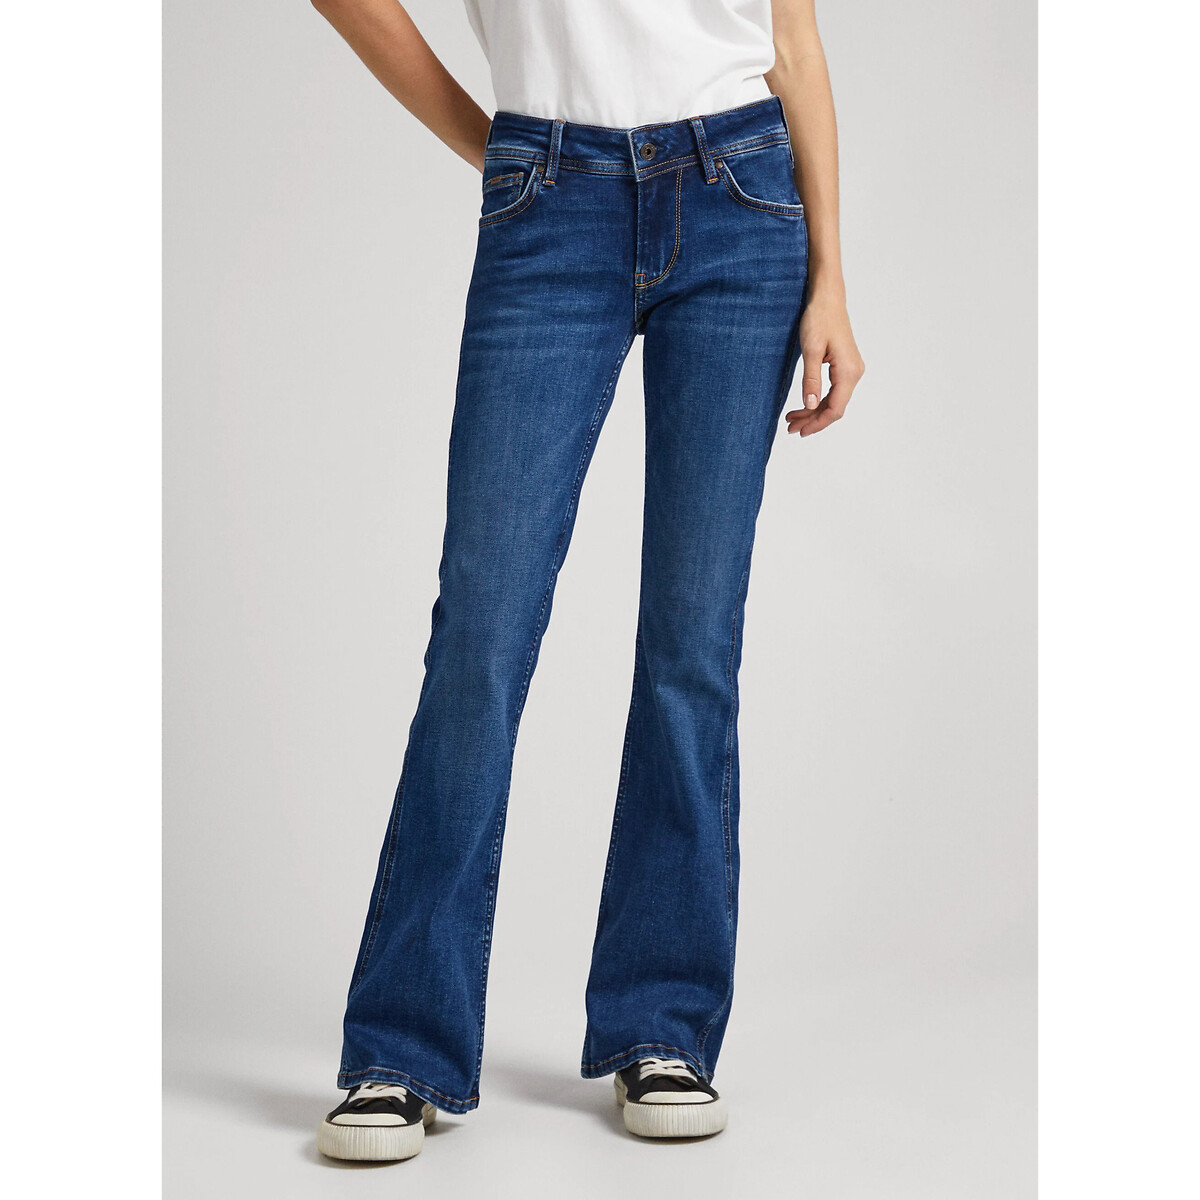 Pepe Jeans New Pimlico Flared Jeans